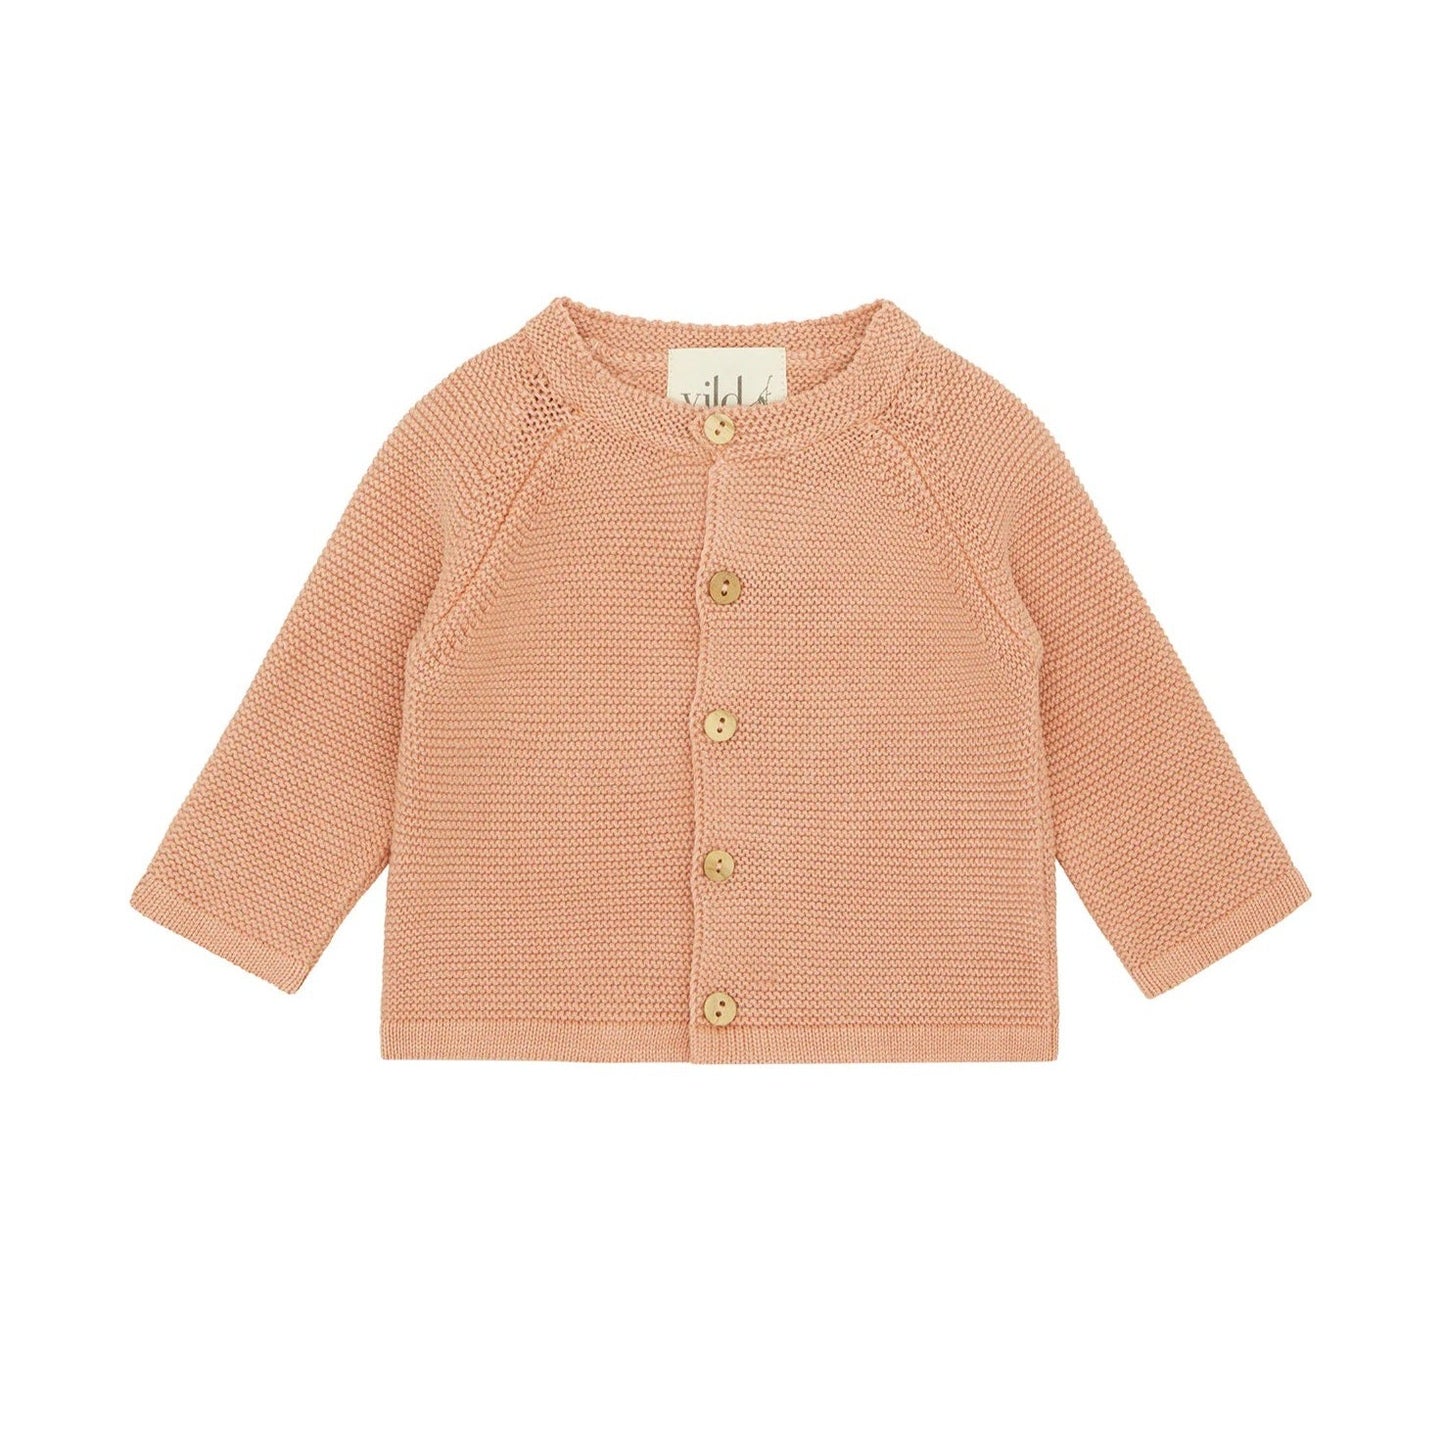 Organic Cotton Baby Knit Cardigan by Vild House of Little (5 Colours Available)